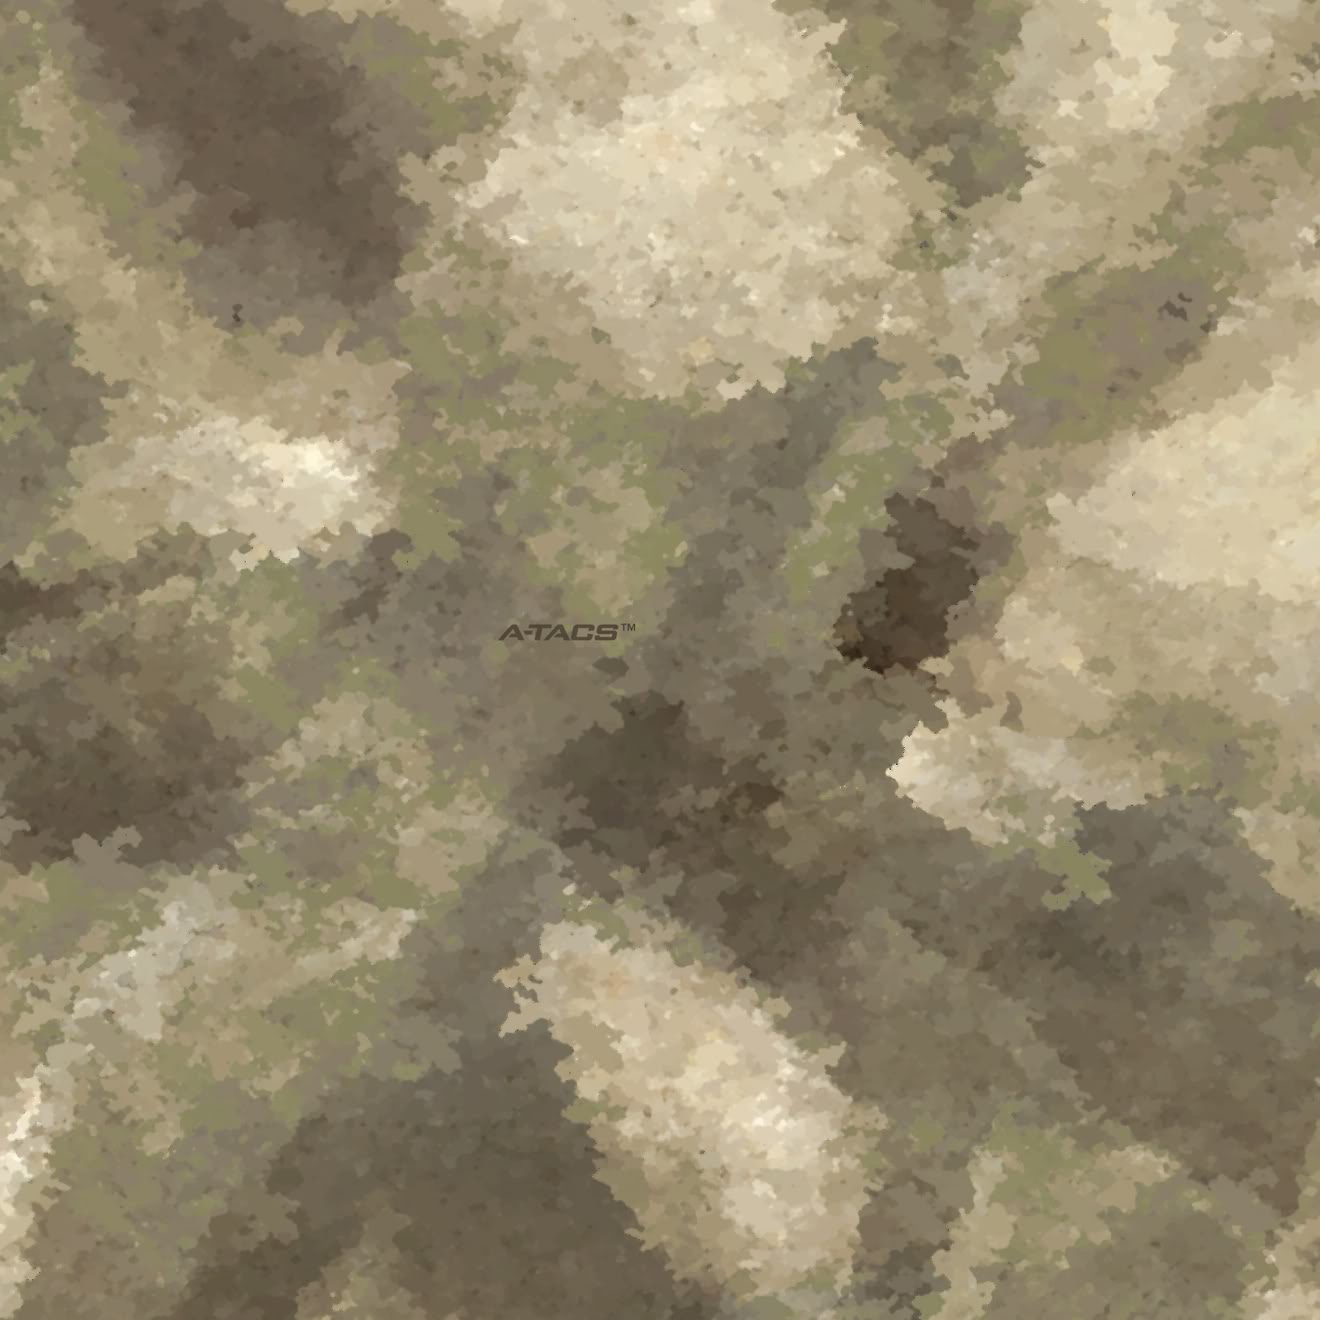 A-TACS, Camouflage Wiki